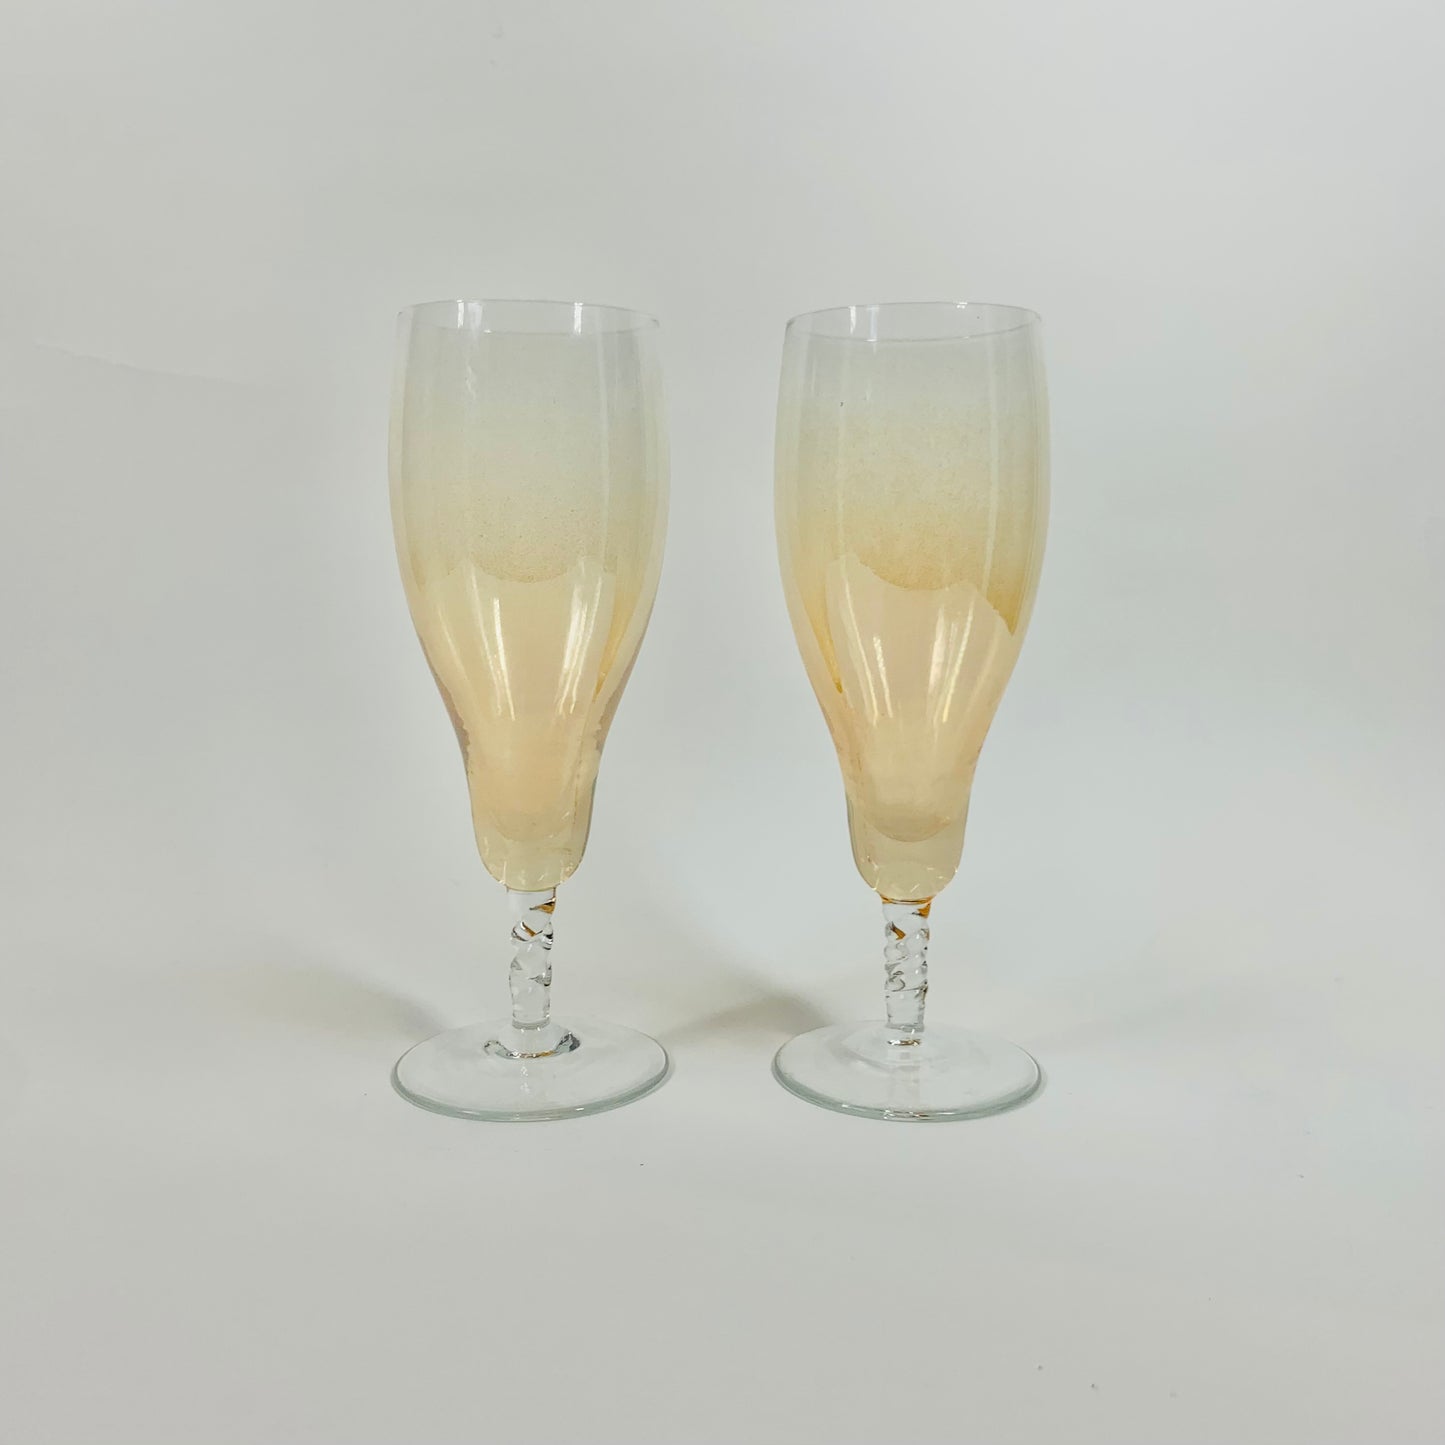 50s CARNIVAL GLASS CHAMPAGNE FLUTES